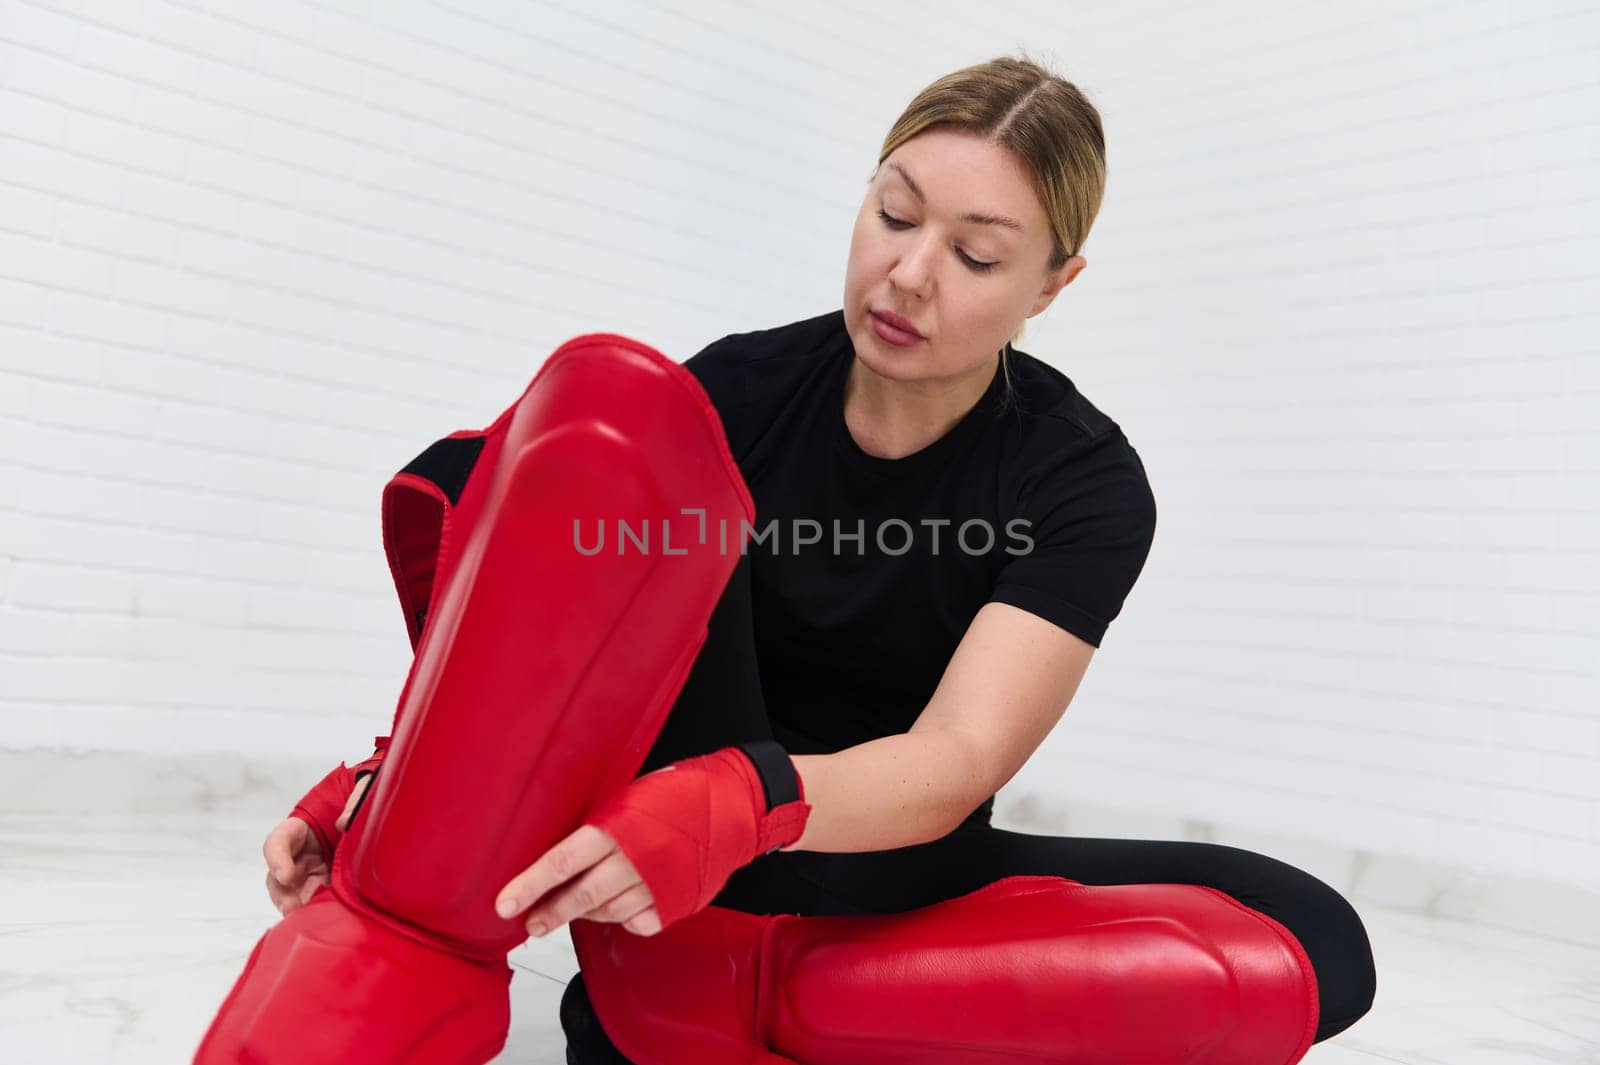 Young European woman fighter, kickboxer putting on red protective kickboxing equipment on legs, ready for training, isolated over white background. People. Kickboxing workout. Martial art. Challenge